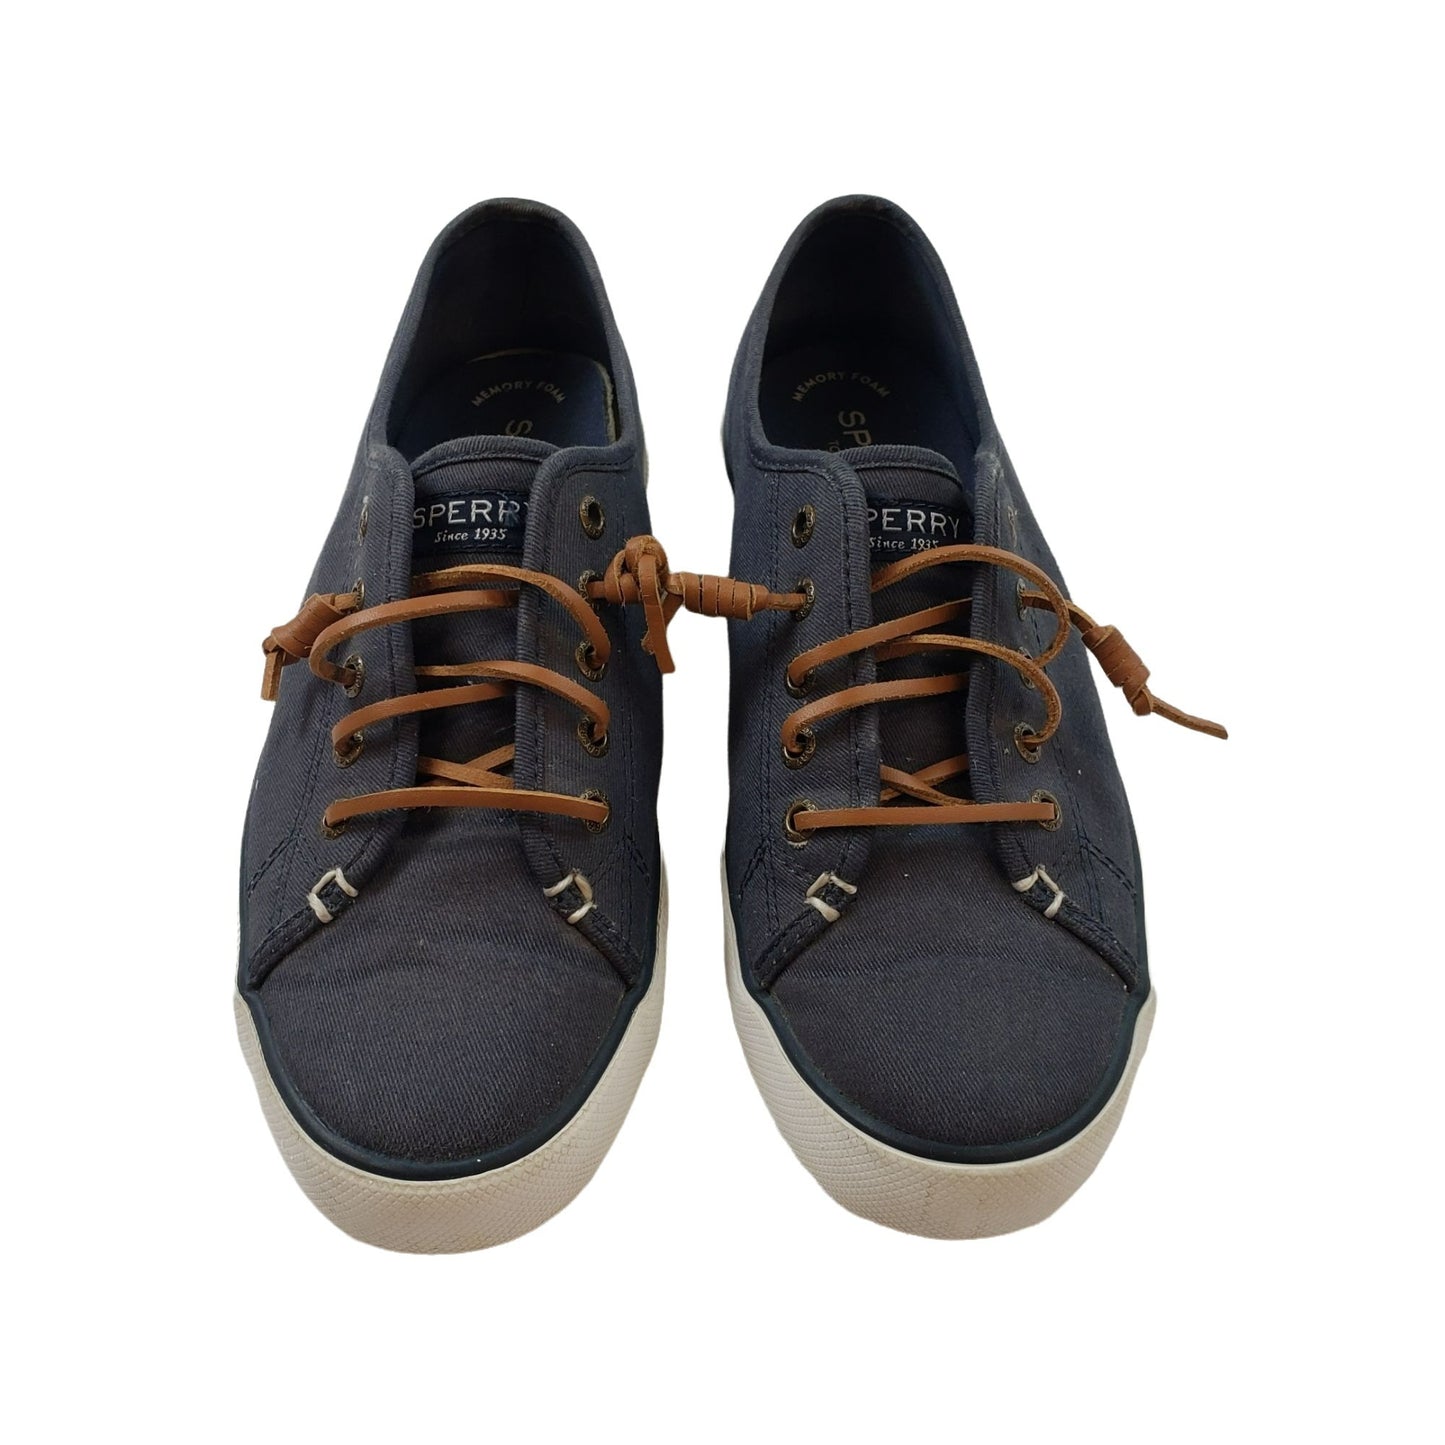 Sperry Top-Sider Seacoast Boat Shoes